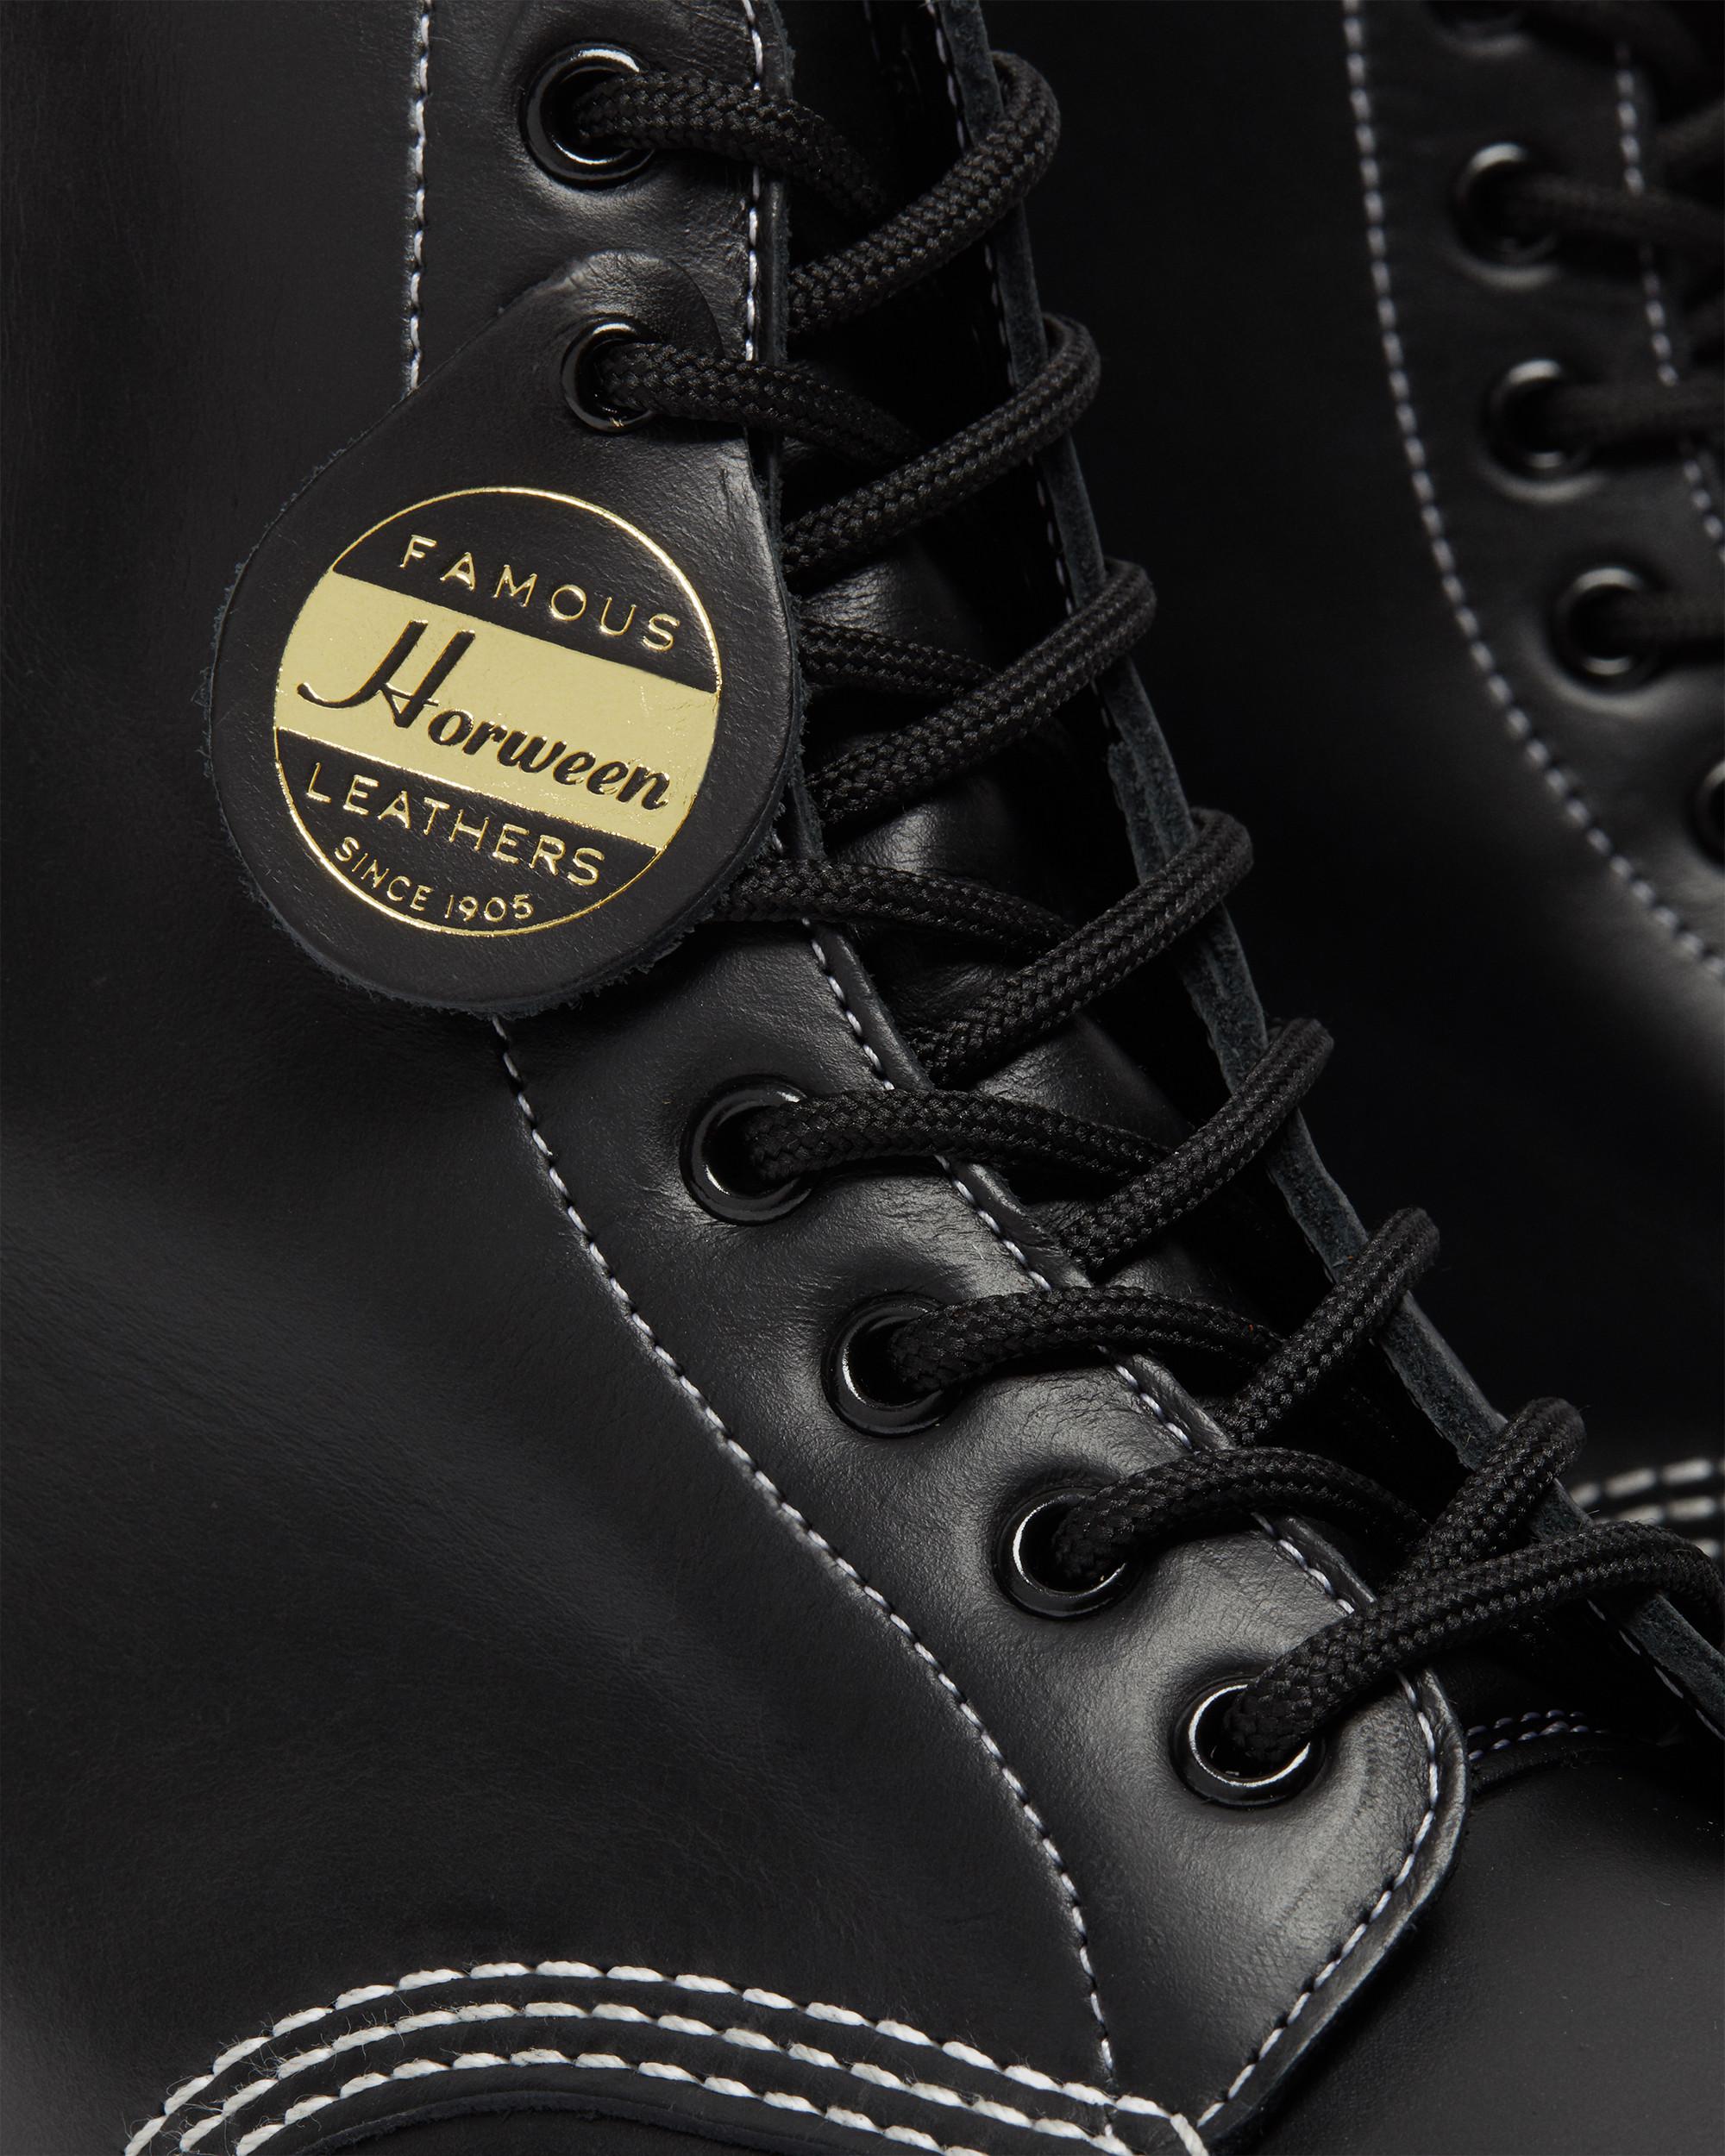 1460 Pascal Made in England Cavalier Leather Lace Up Boots1460 Pascal Made in England Cavalier Leather Lace Up Boots Dr. Martens